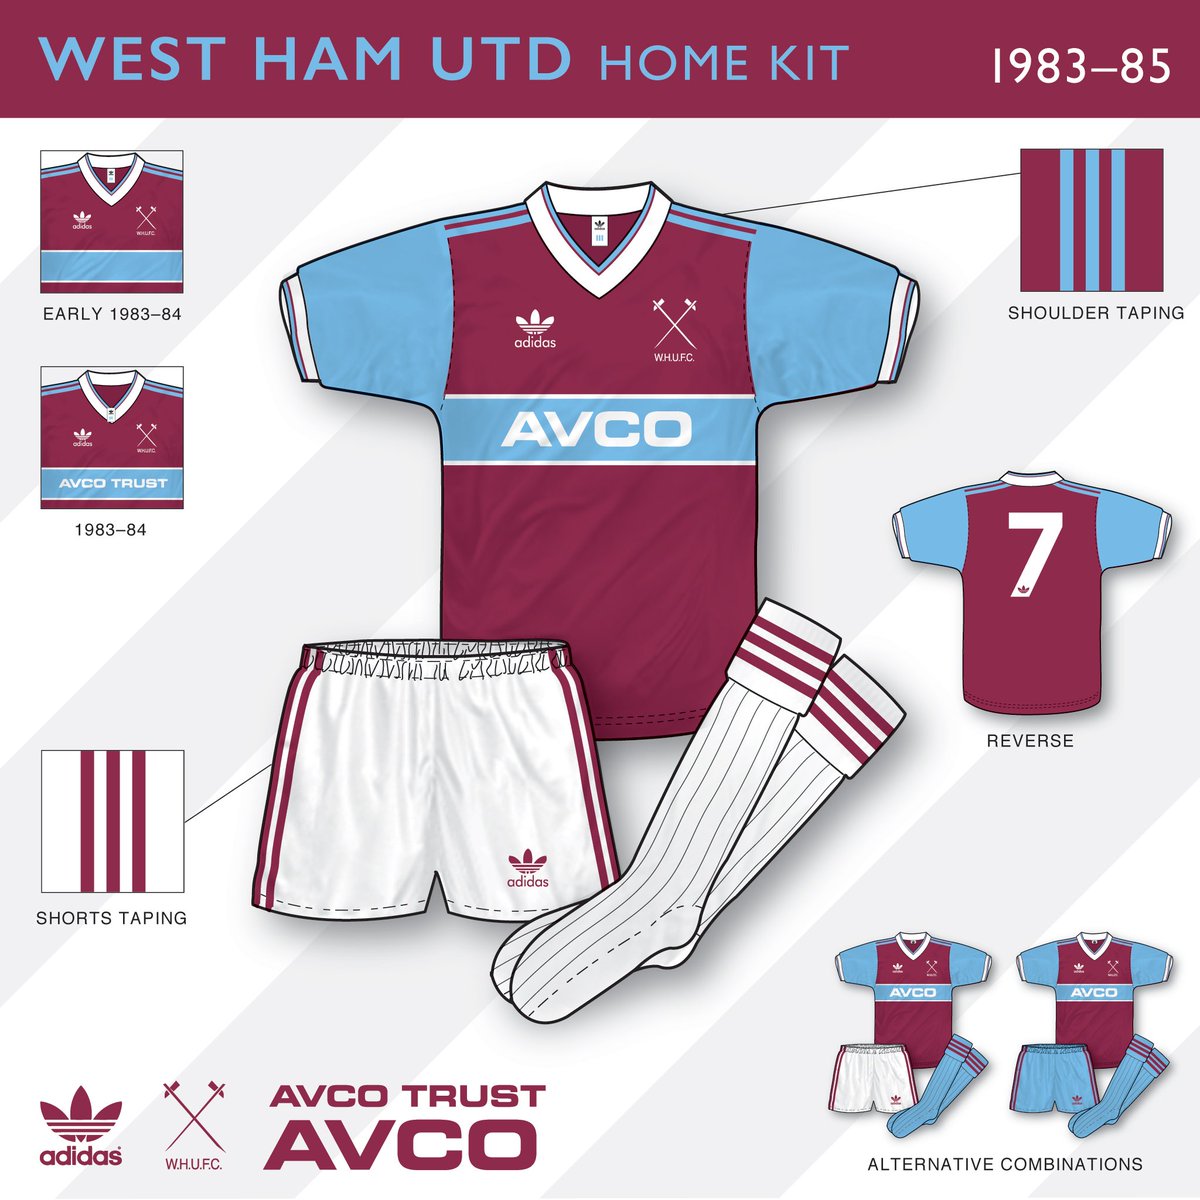 PapoeaNieuwGuinea Aap Ik denk dat ik ziek ben John Devlin on Twitter: "West Ham's classic 1983–85 adidas home kit  examined in detail. Read more on the strip on my Facebook page:  https://t.co/XgeG7HbL6l Official licensed WHUFC Kit History A3 prints  available